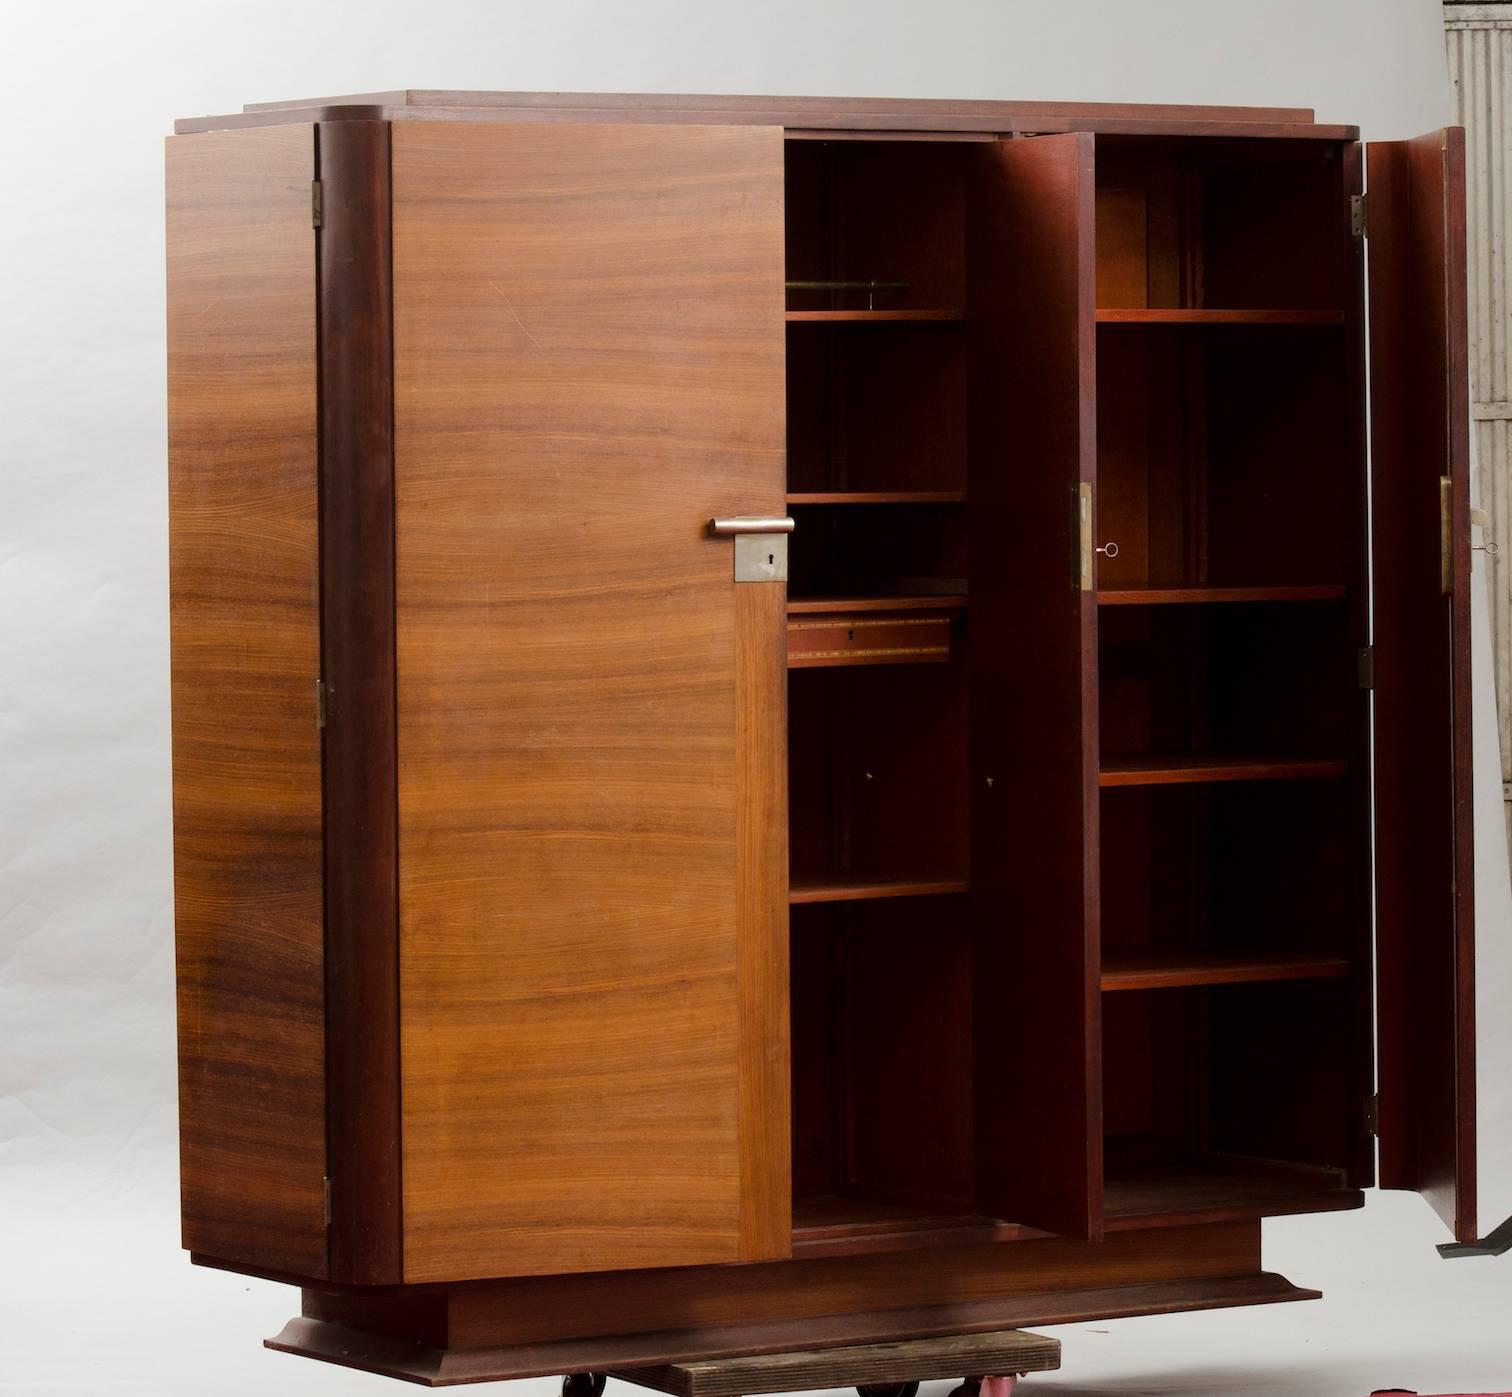 Art Deco rosewood and chrome cabinet or bookcase.
Price fully restored: 5625€
The price shown is in the original condition.
We have our own workshop and we can restore these items, including upholstery and all the piece might need.